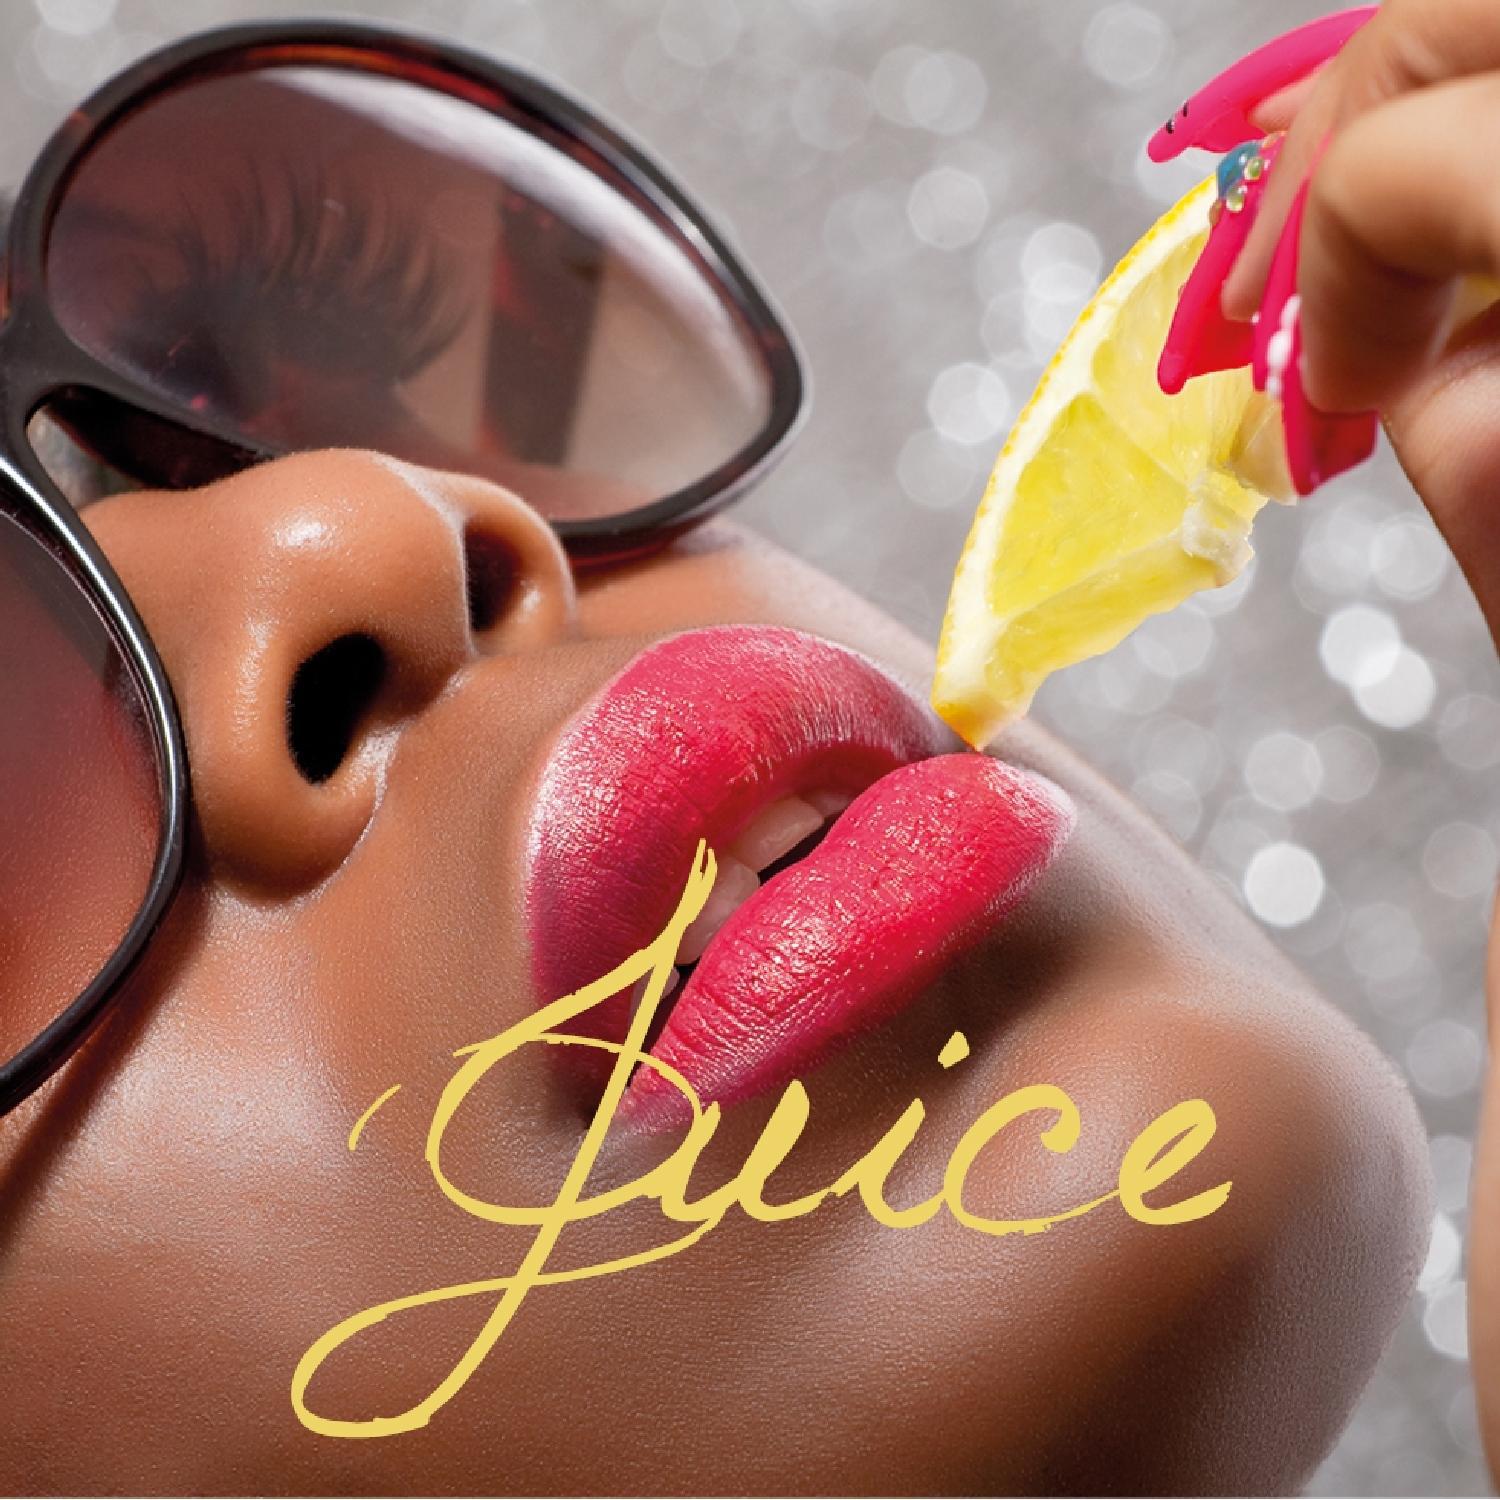 Licking own juice compilation